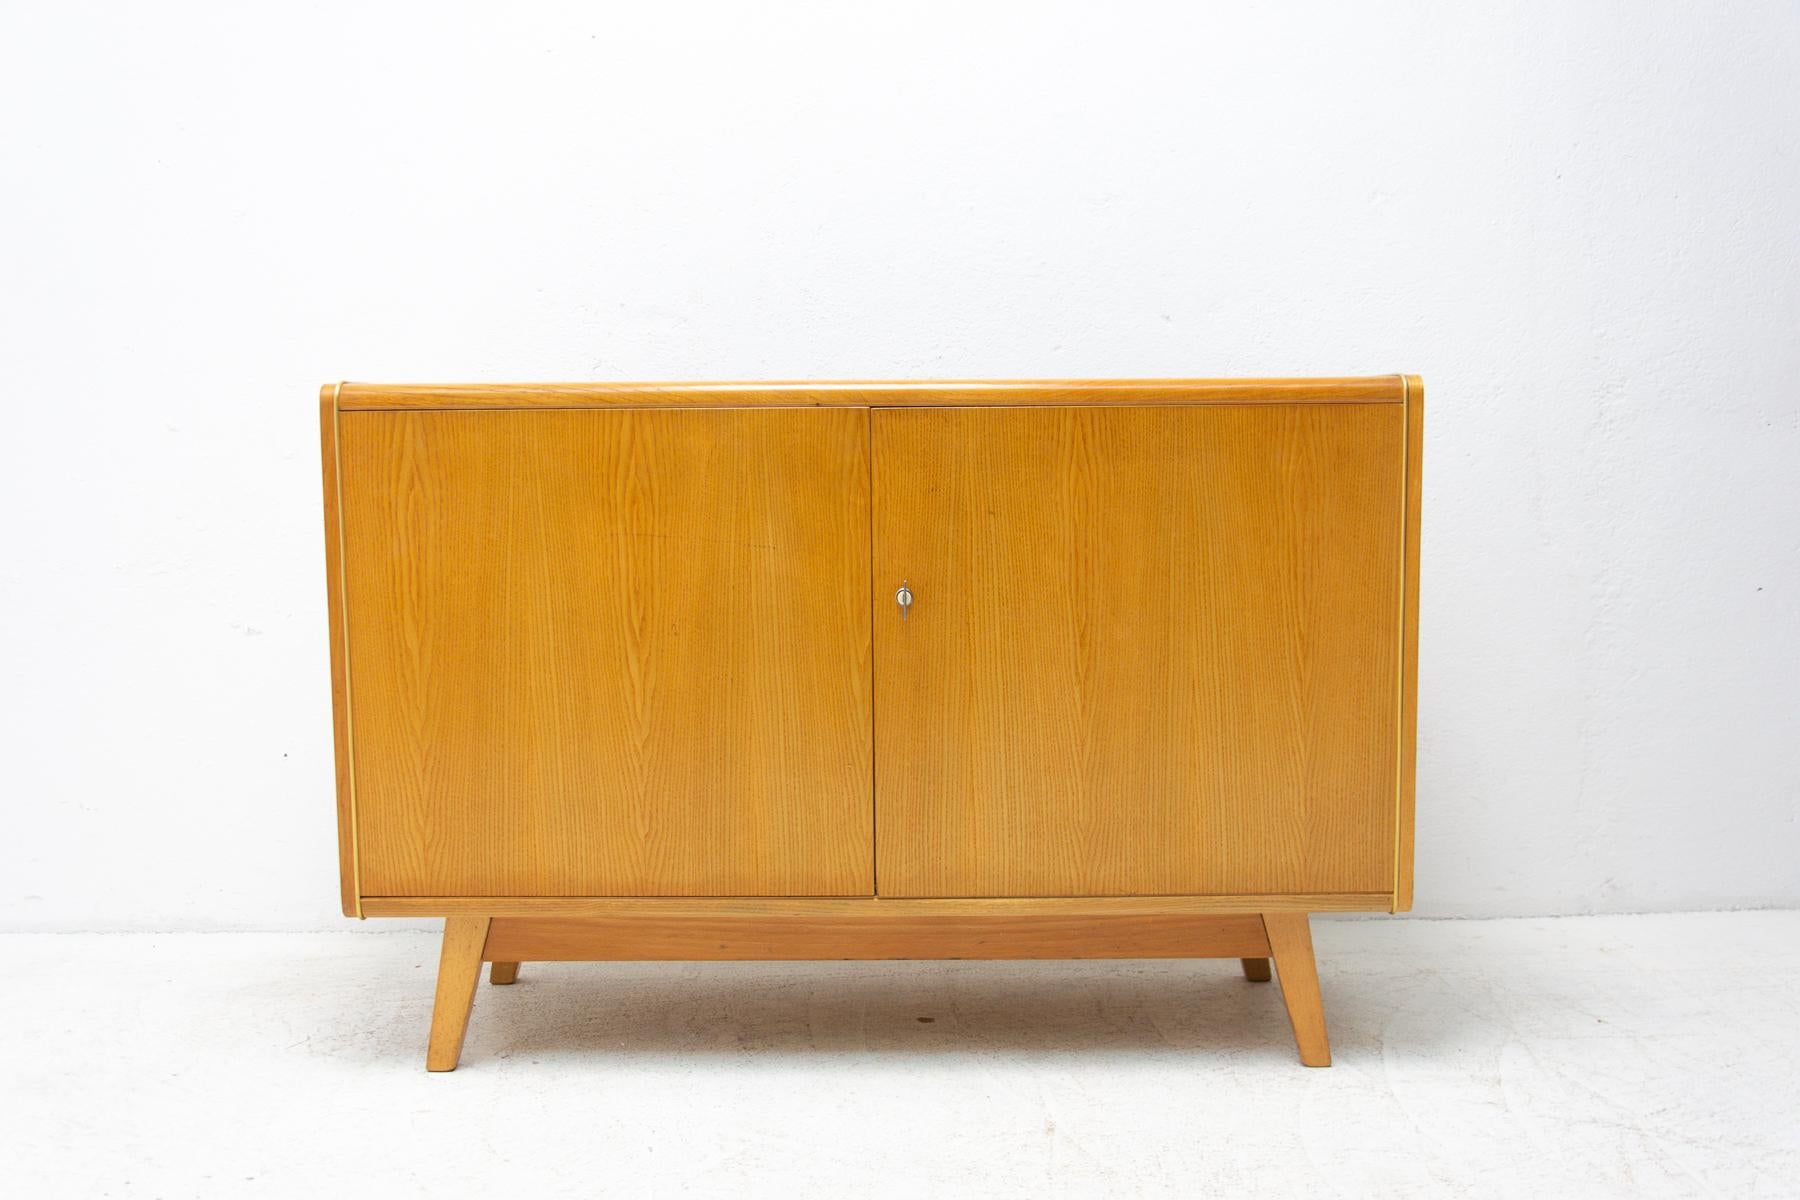 This mid century sideboard was designed by Hubert Nepožitek & Bohumil Landsman for Jitona company in the 1960´s. Material: beech wood, opaxite glass. In good Vintage condition, showing signs if age and using.
  